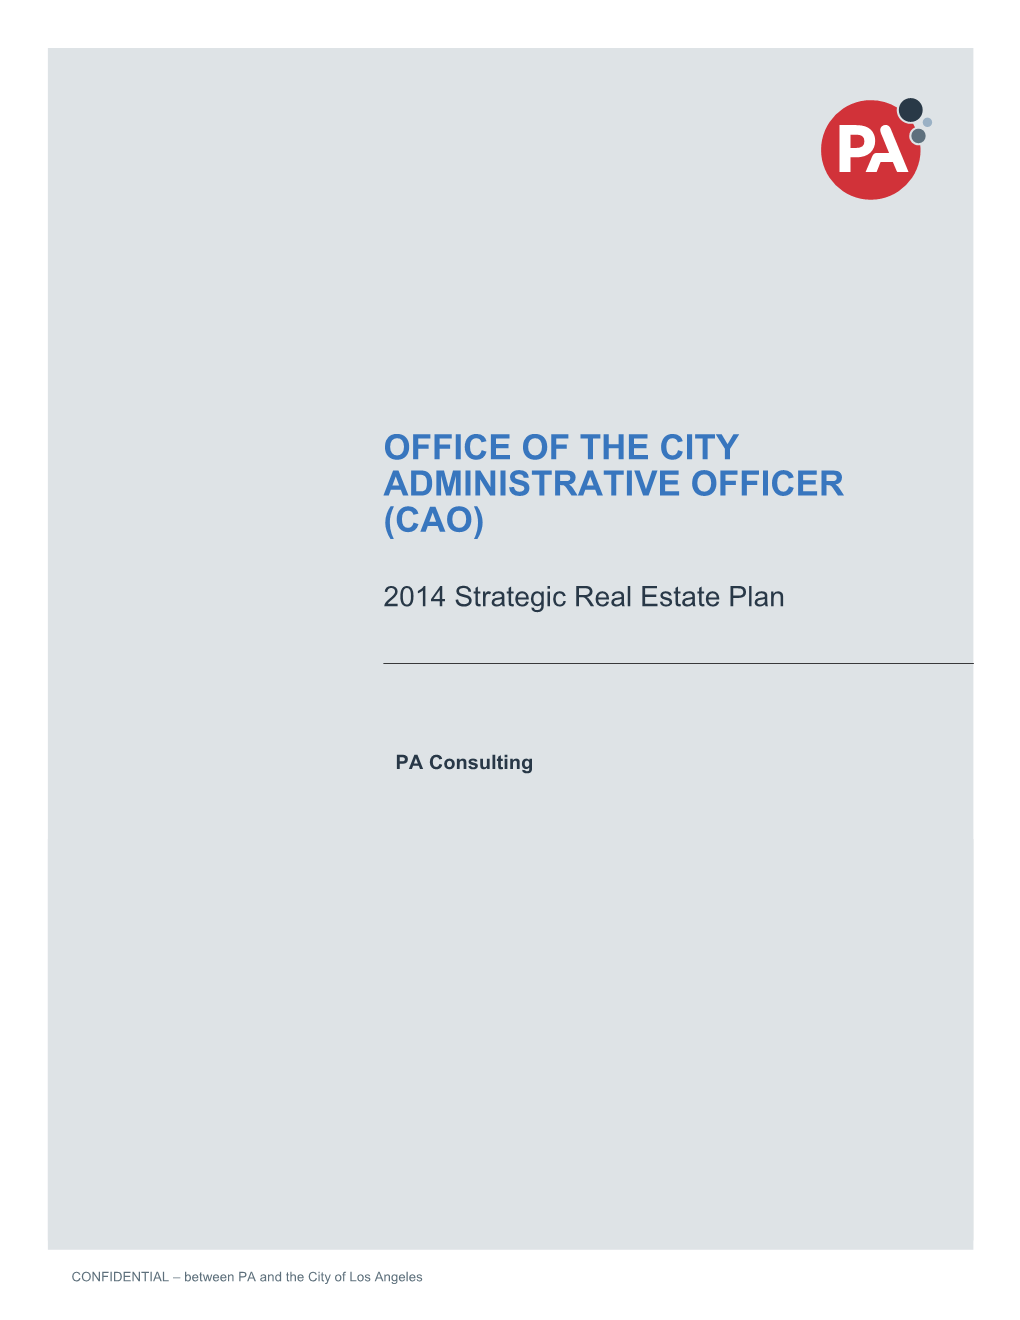 Office of the City Administrative Officer (Cao)